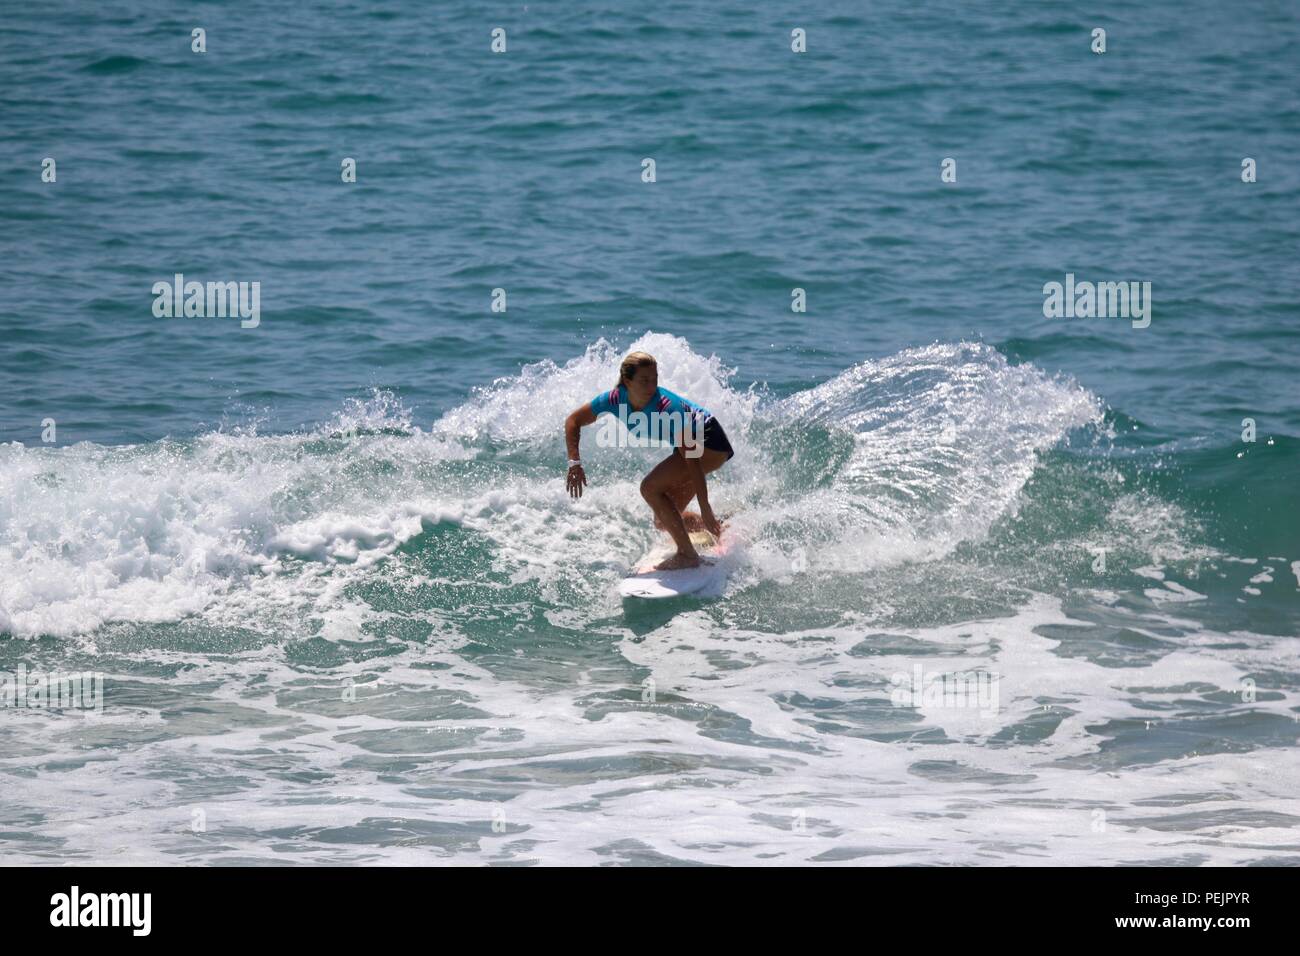 Coco Ho competing in the US Open of Surfing 2018 Stock Photo